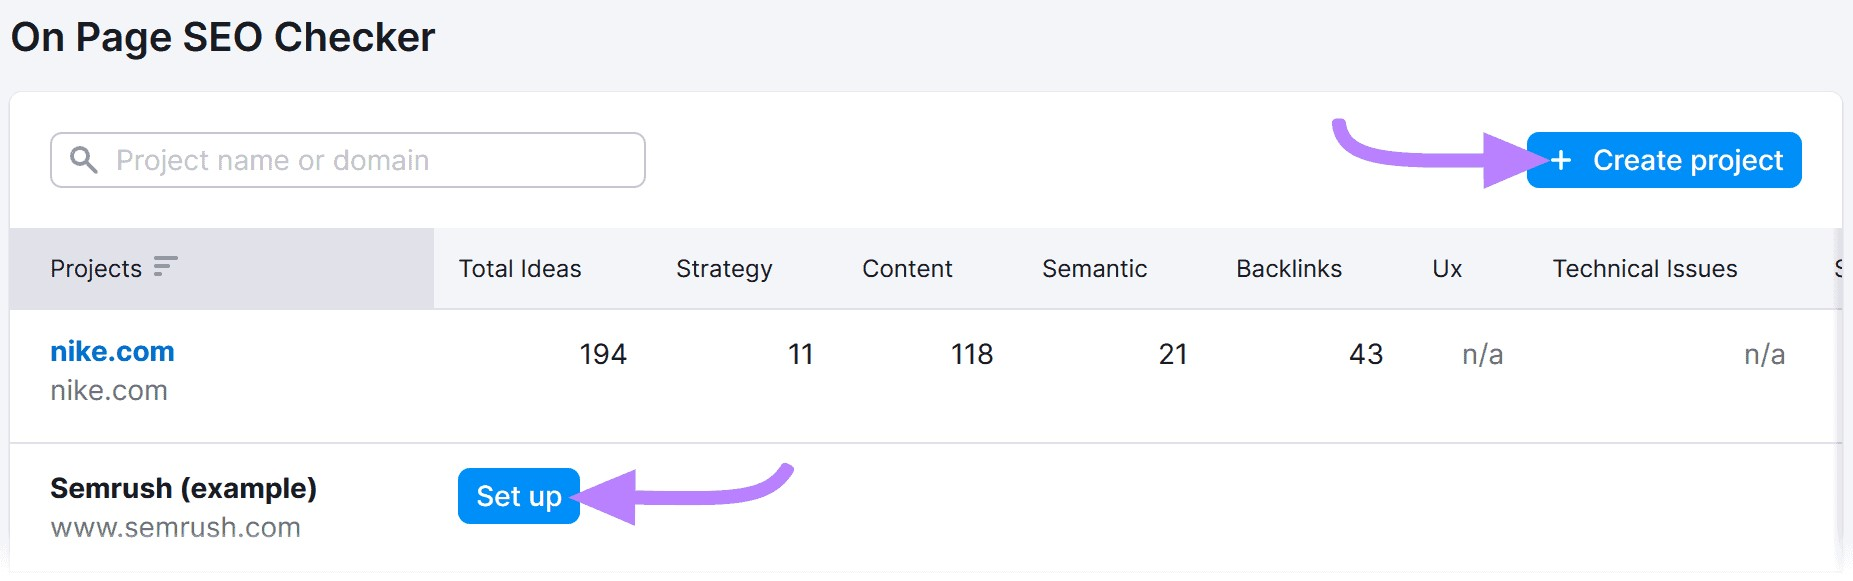 “+ Create project” and "Set up" buttons highlighted in the On Page SEO Checker